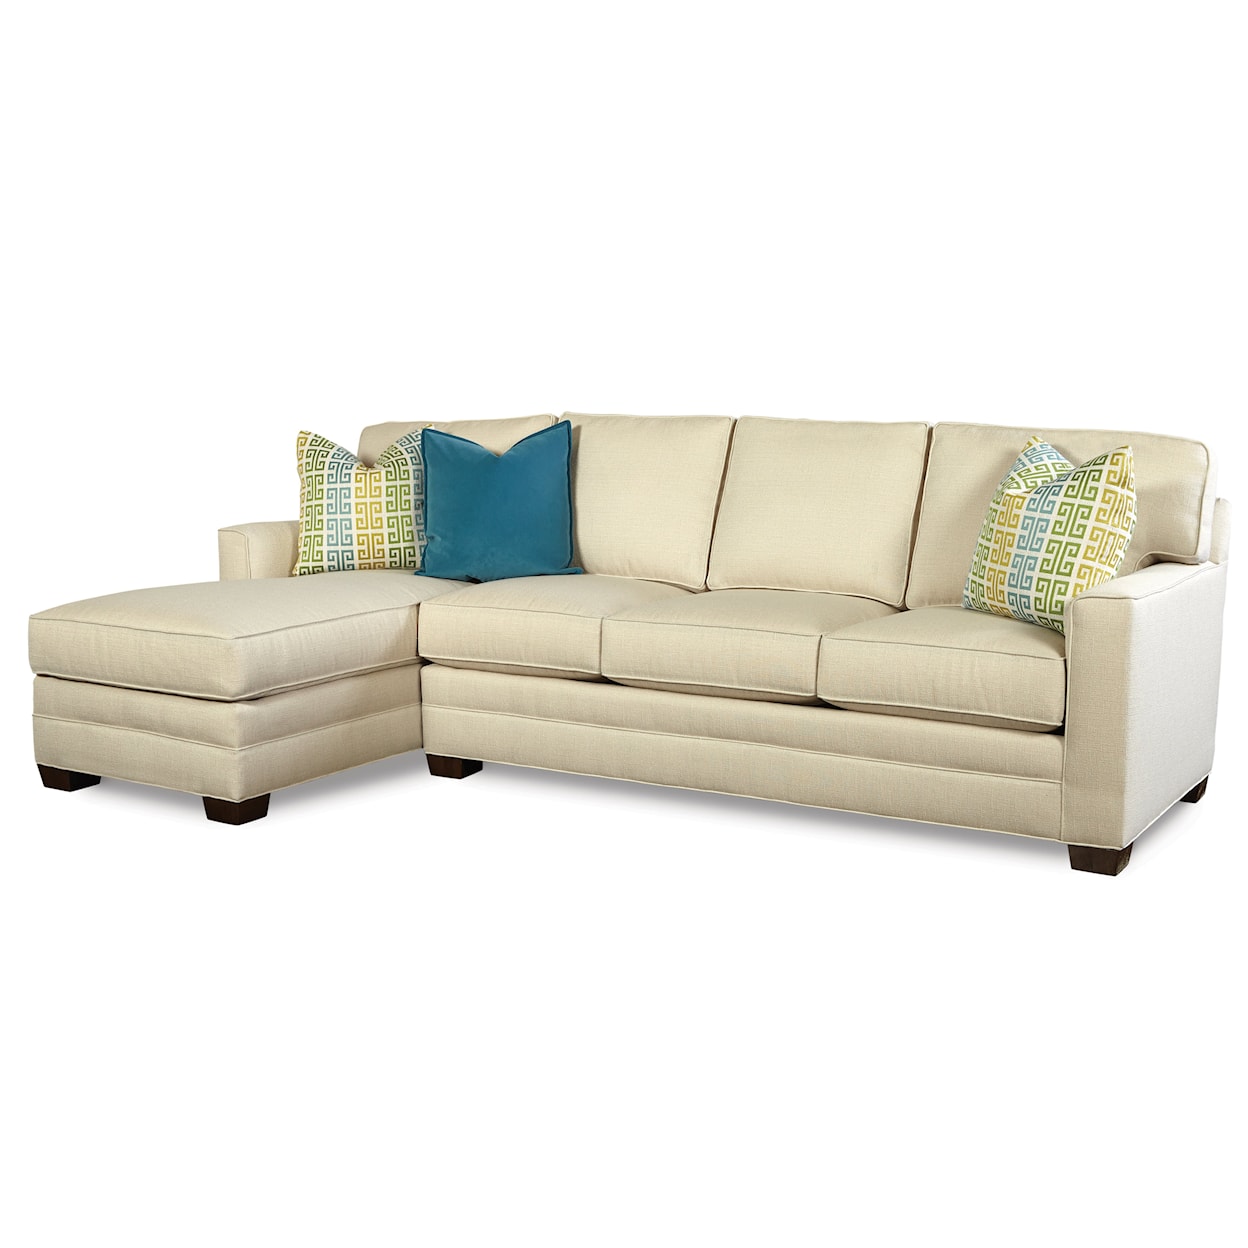 Huntington House 2062 Collection 4-Seat Sectional Sofa with Chaise